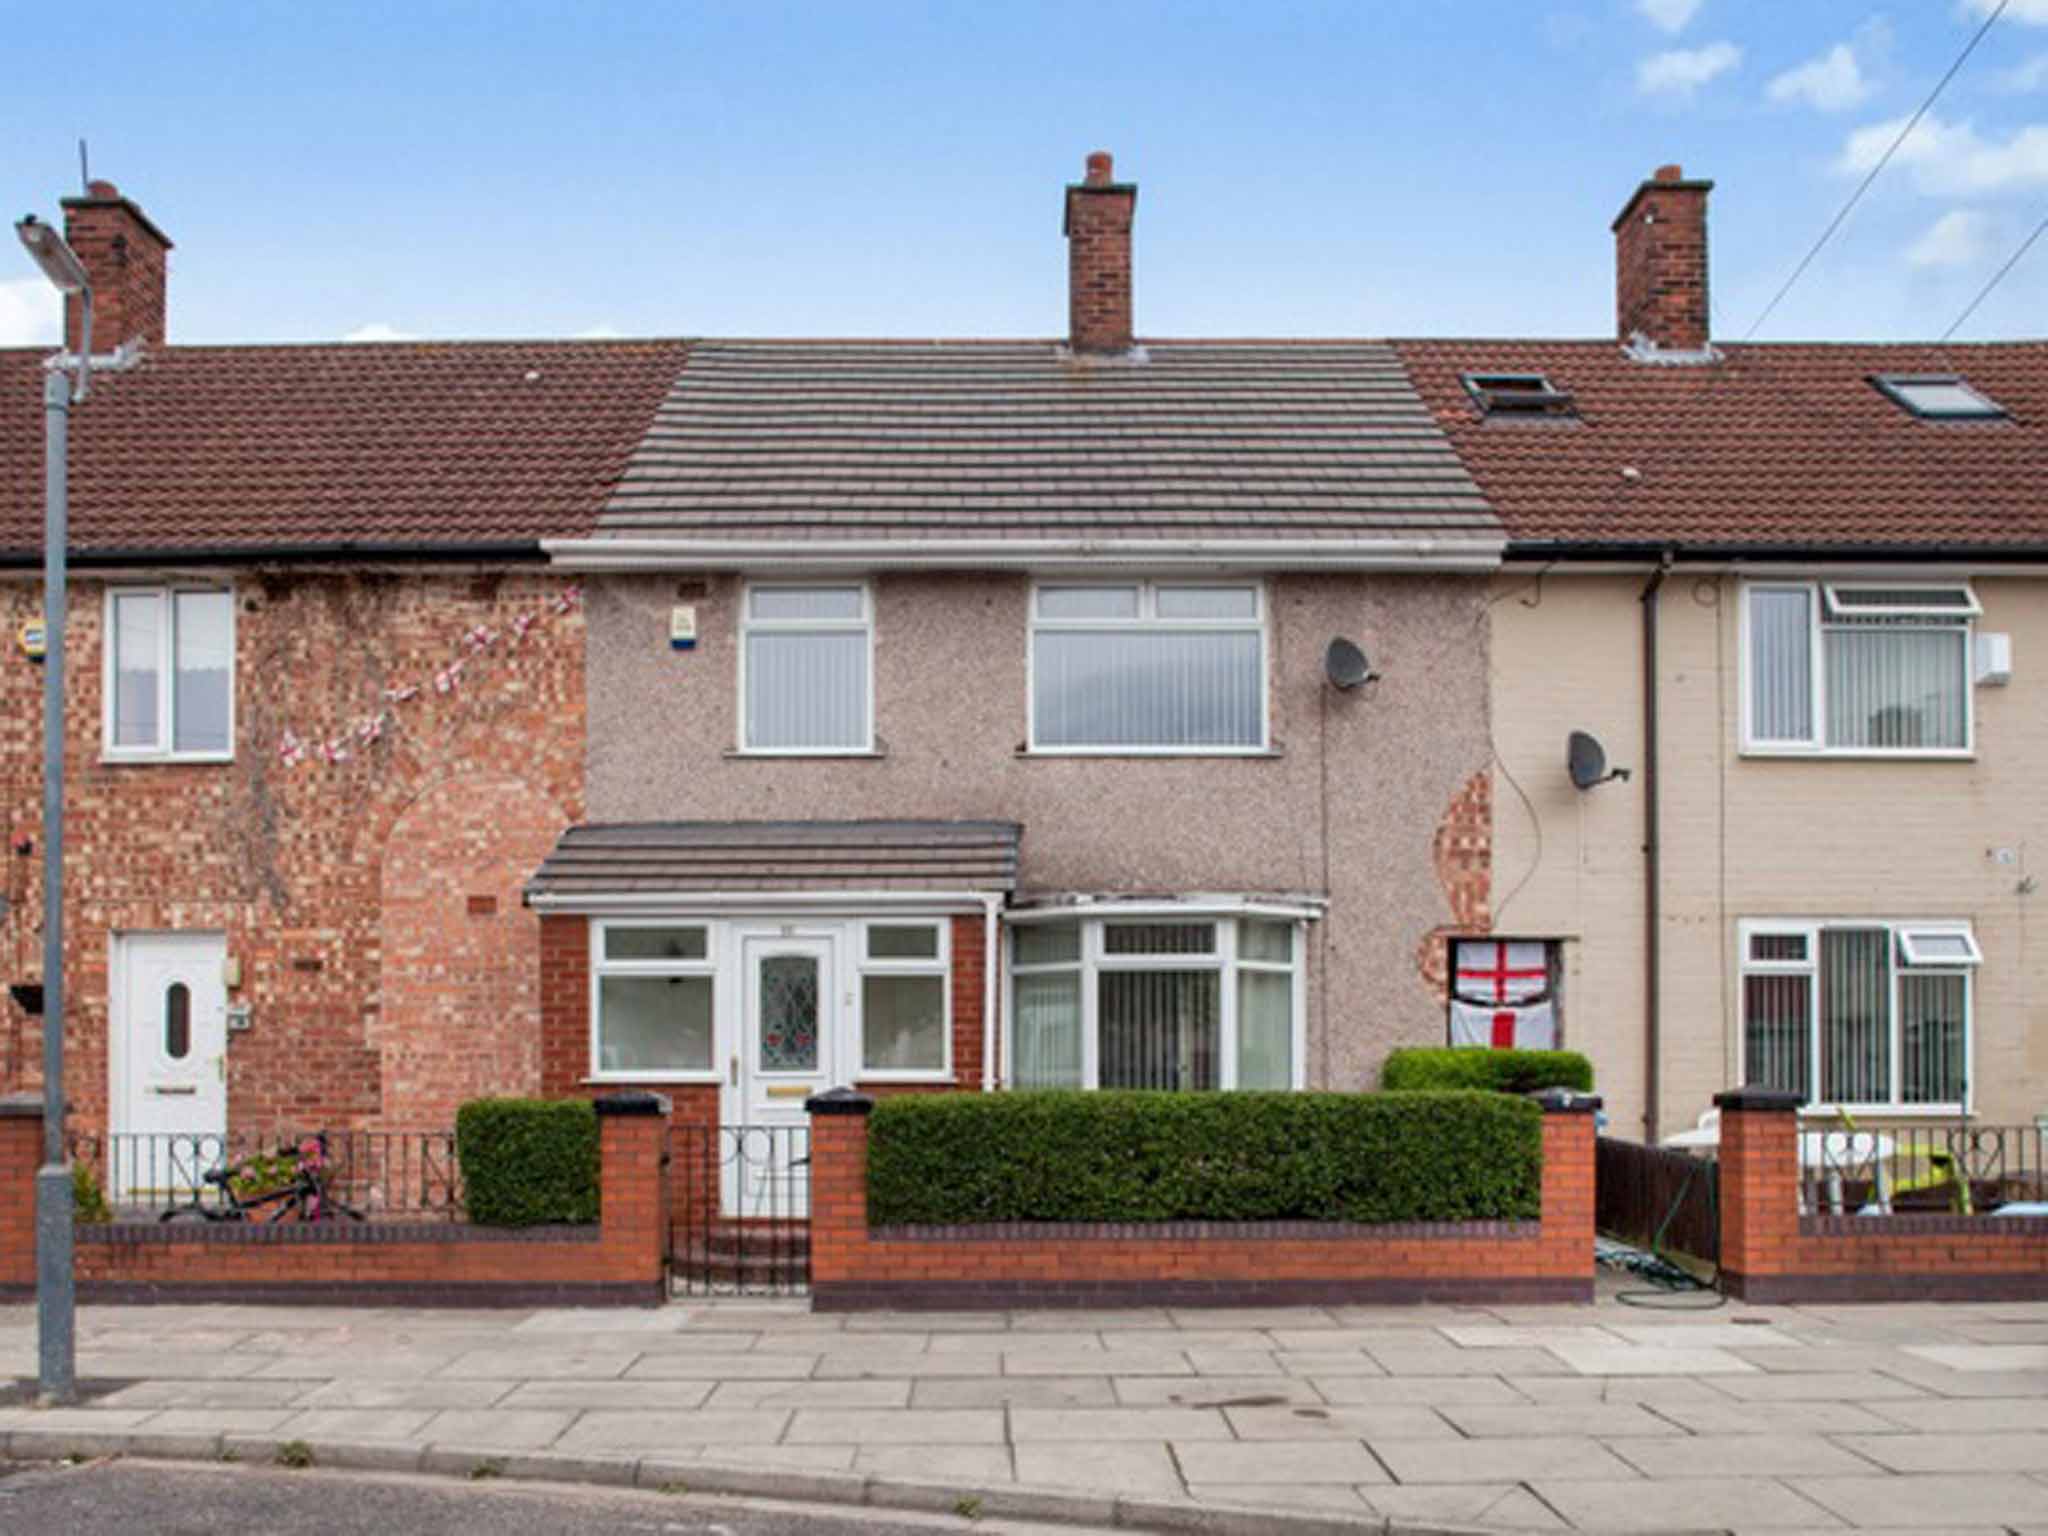 George Harrison’s former childhood home sold for £156,000